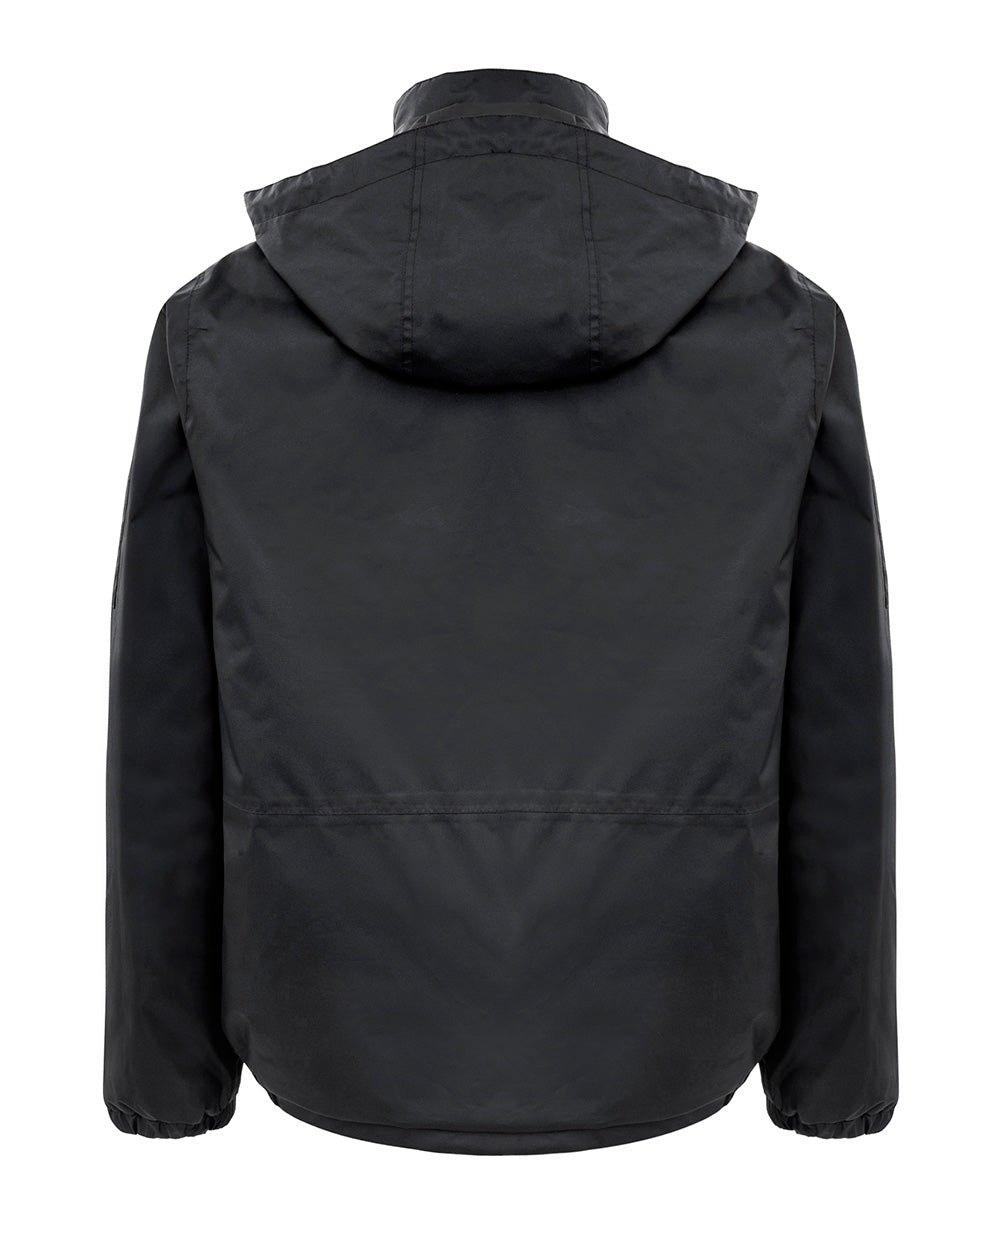 Pilot Jacket with Hood in Black